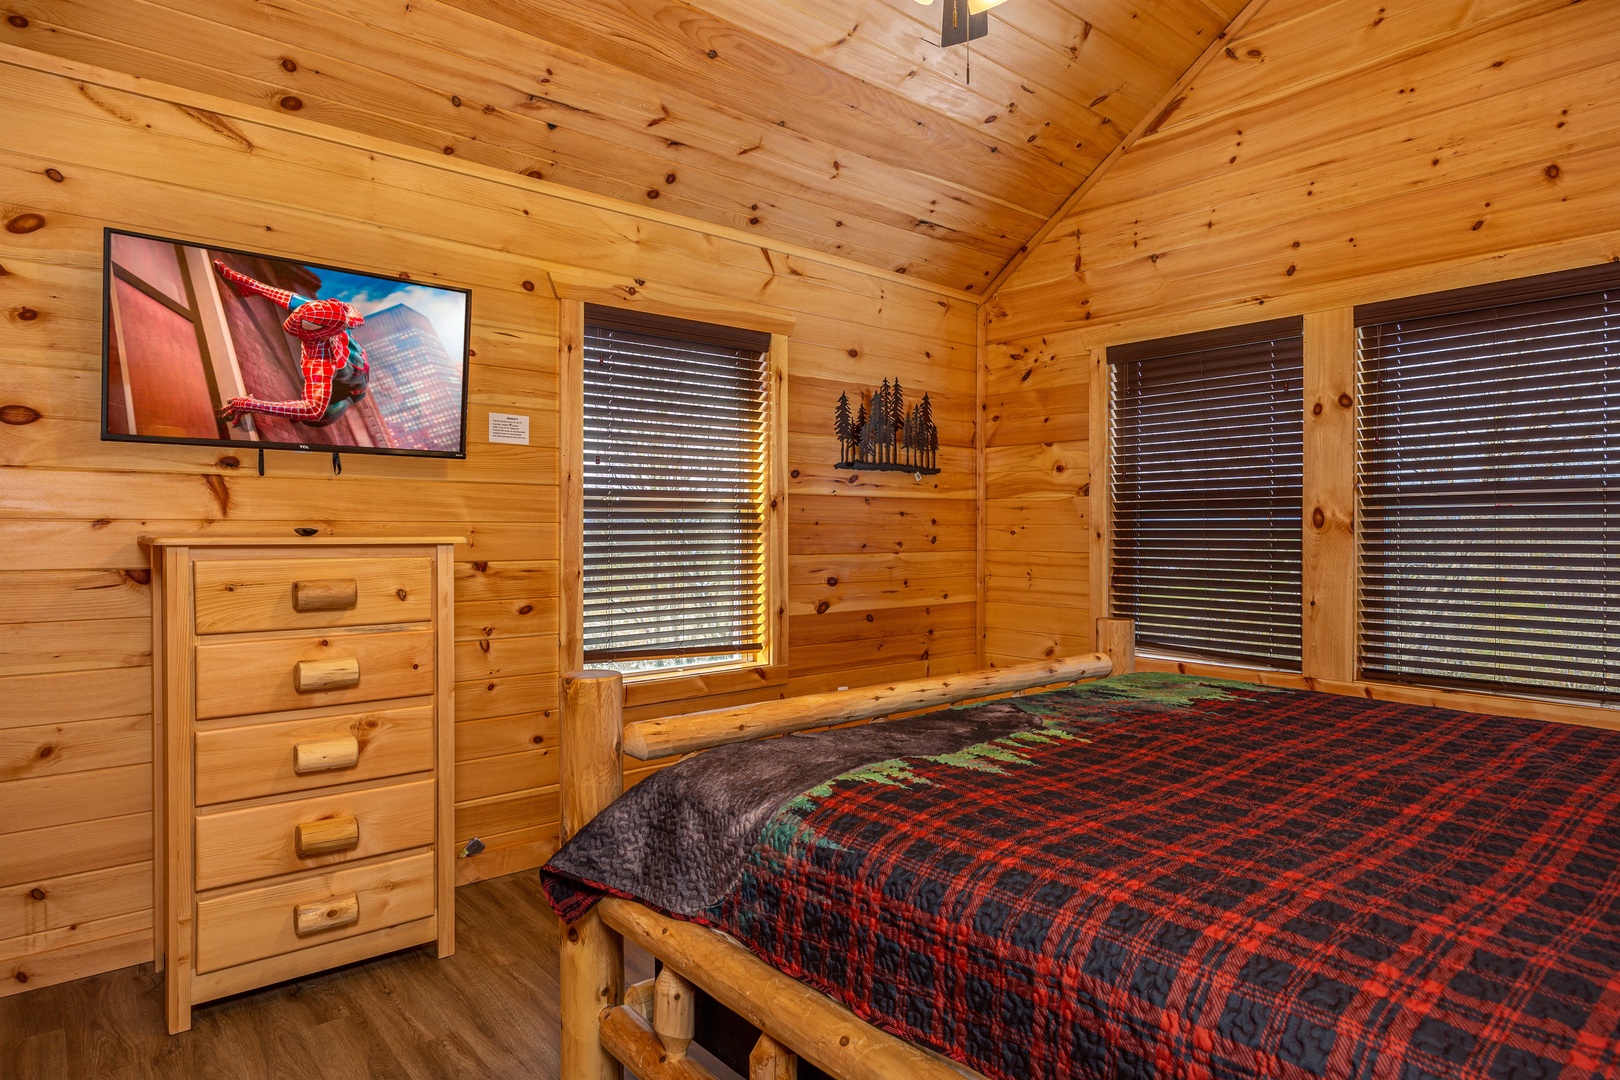 Bedroom amenities at Mountain Pool & Paradise, a 3 bedroom cabin rental located in Pigeon Forge